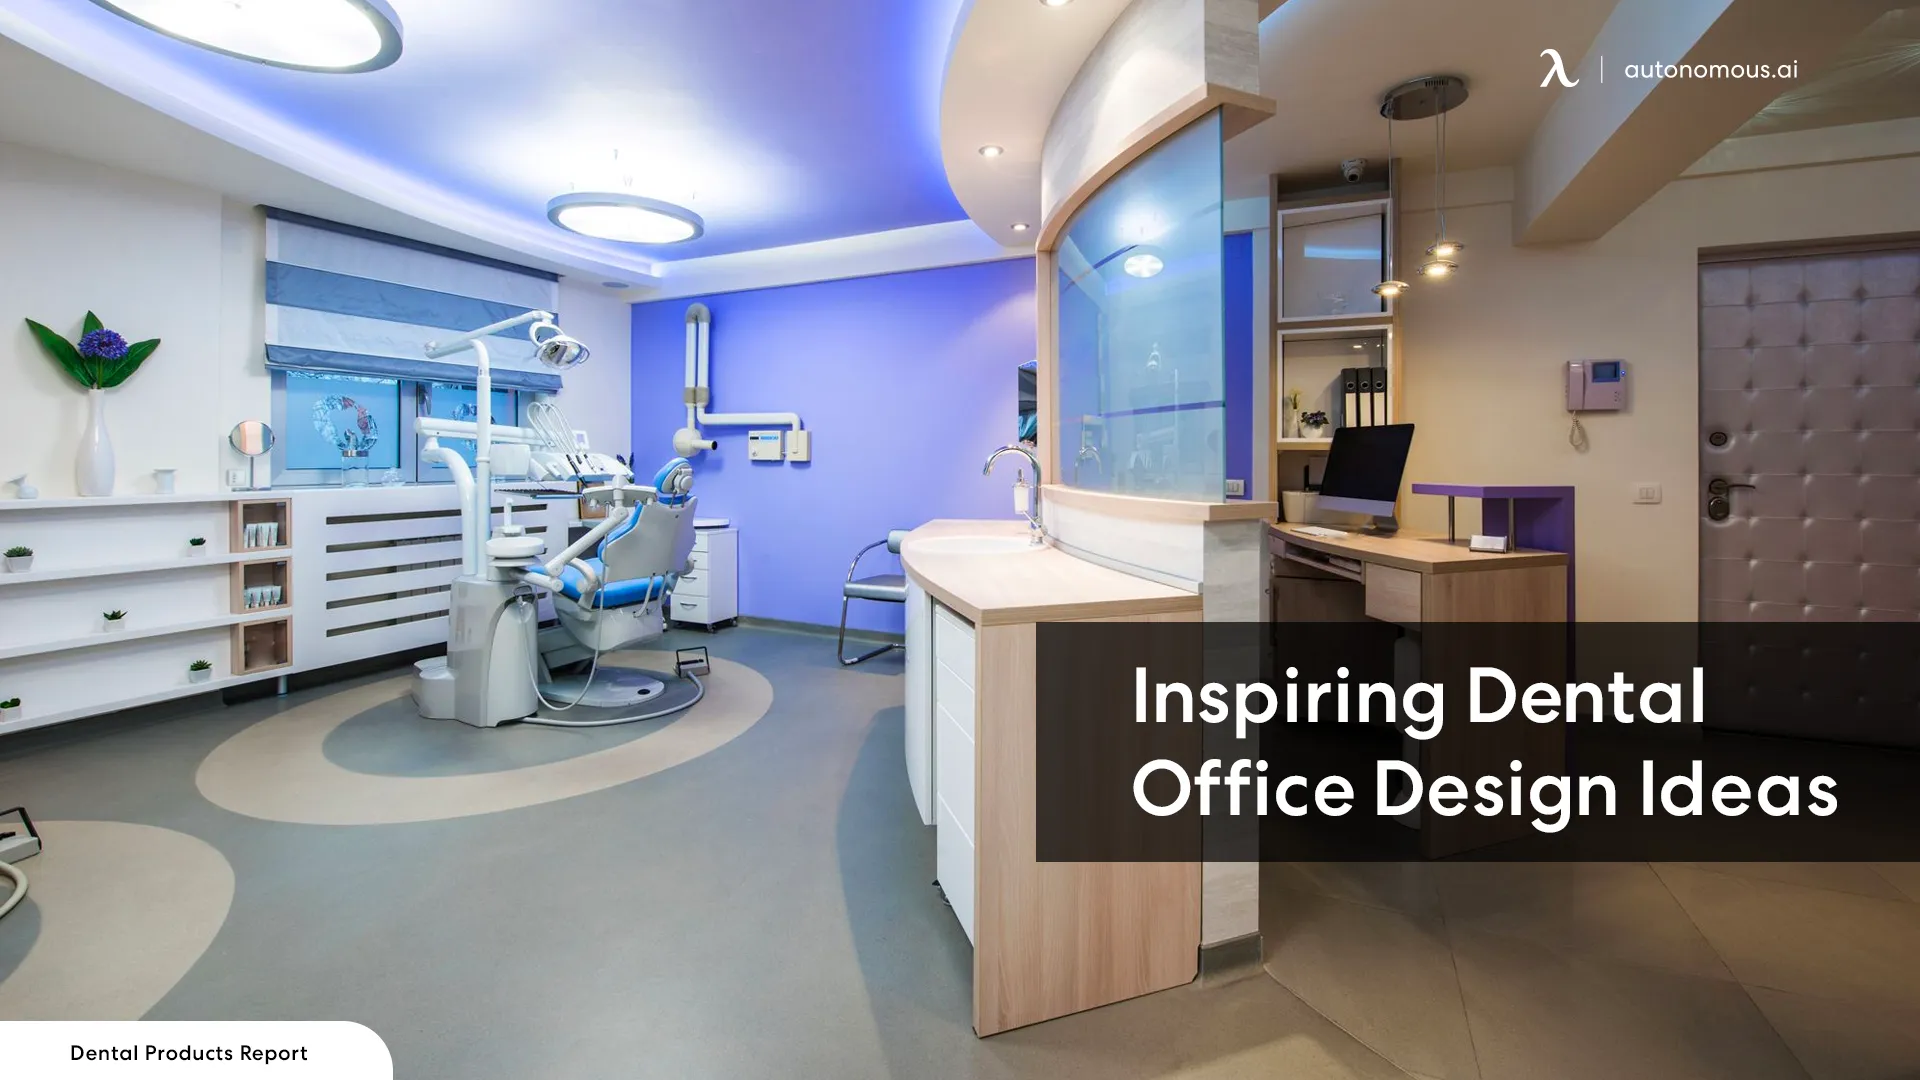 10 Brilliant Dental Office Design Ideas to Wow Your Patients